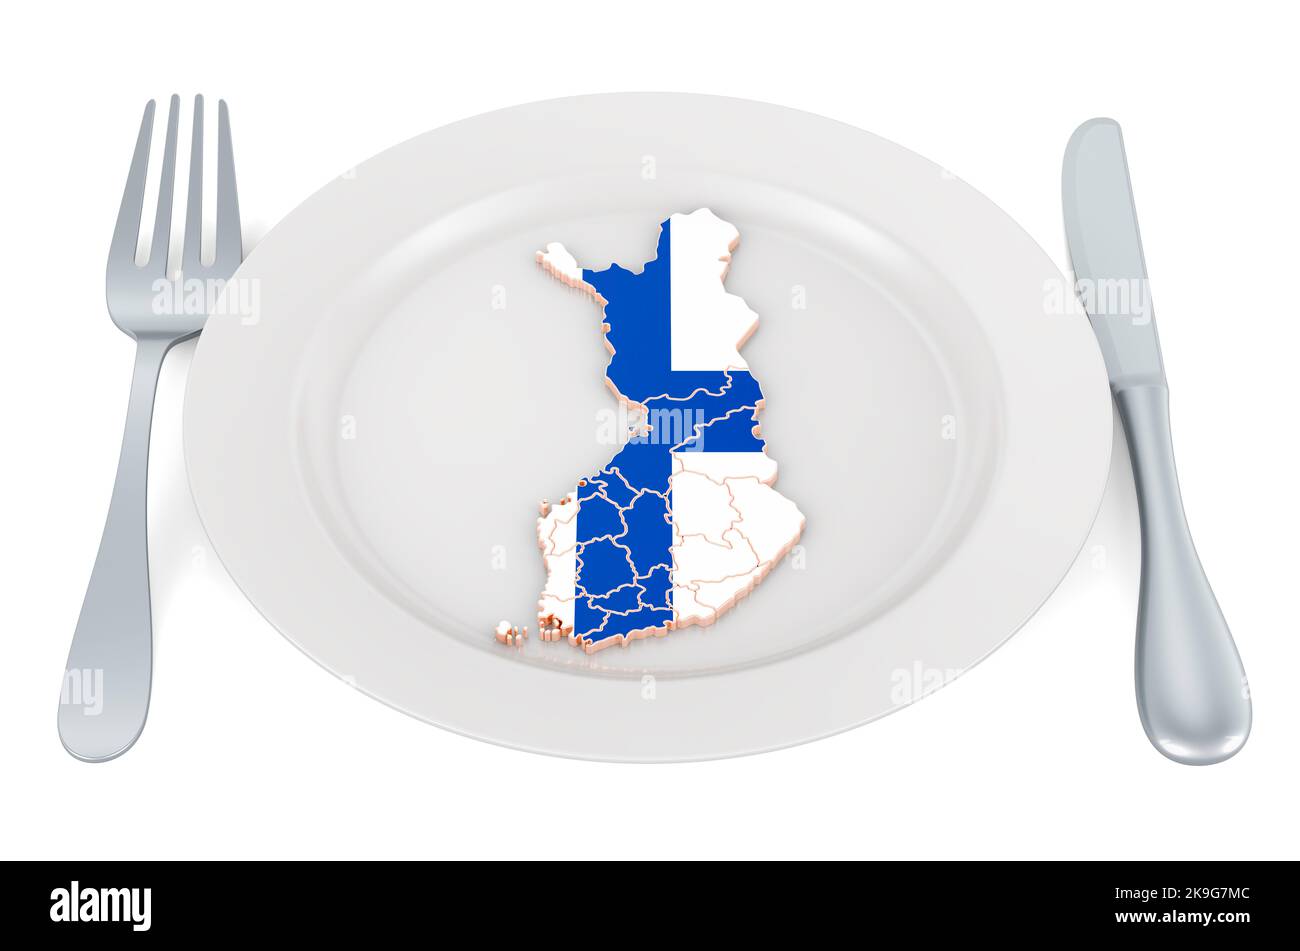 Finnish cuisine concept. Plate with map of Finland. 3D rendering isolated on white background Stock Photo